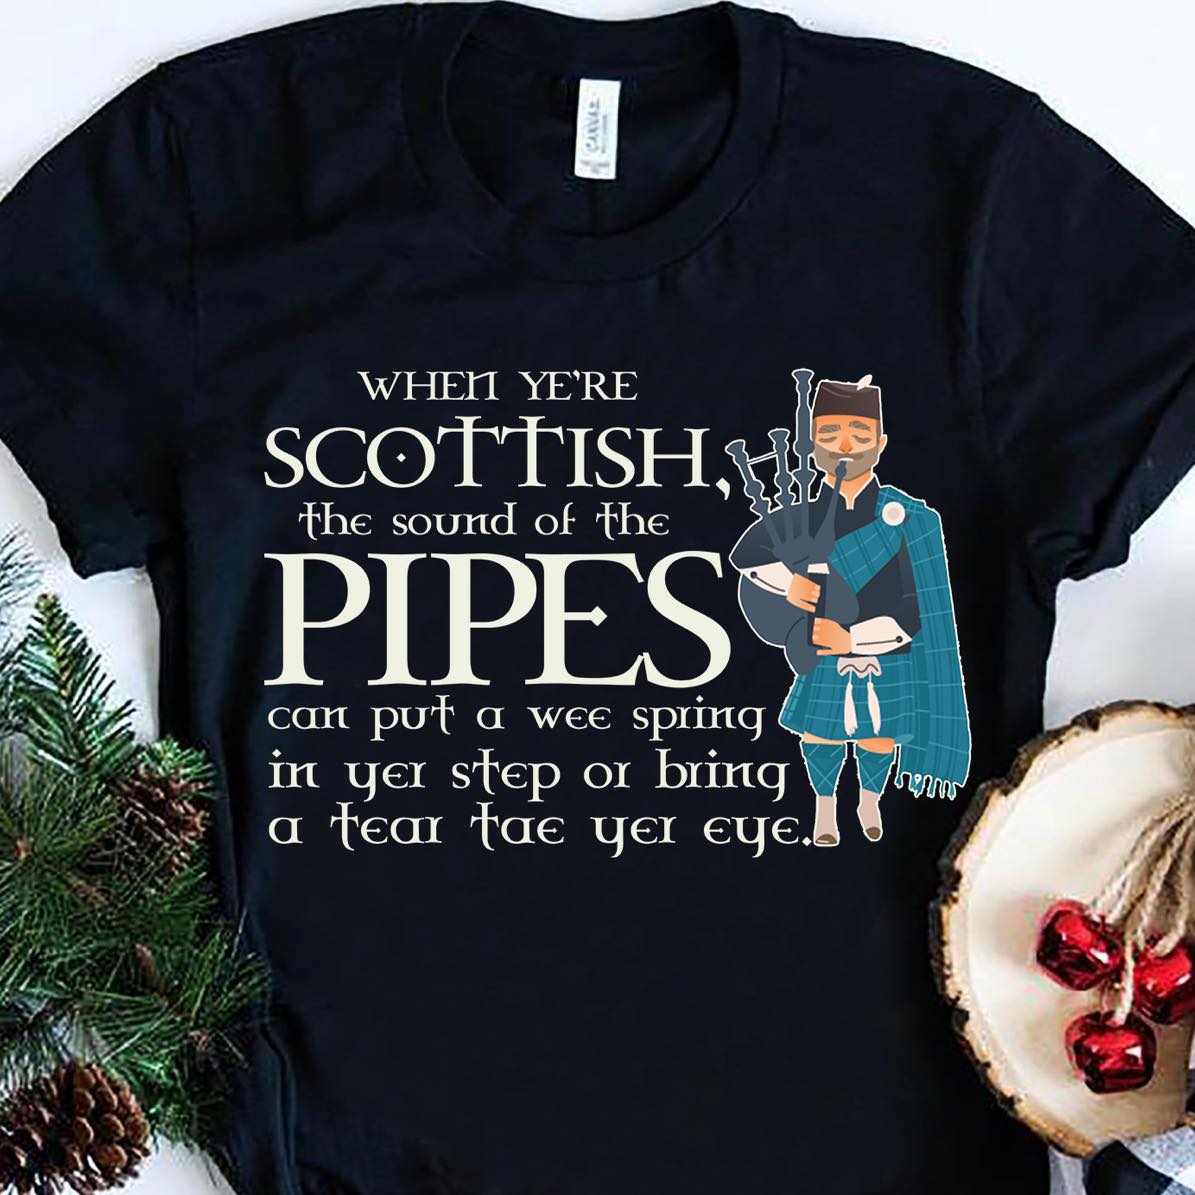 When ye're Scottish the sound of the Pipes can put a wee spring in yer step